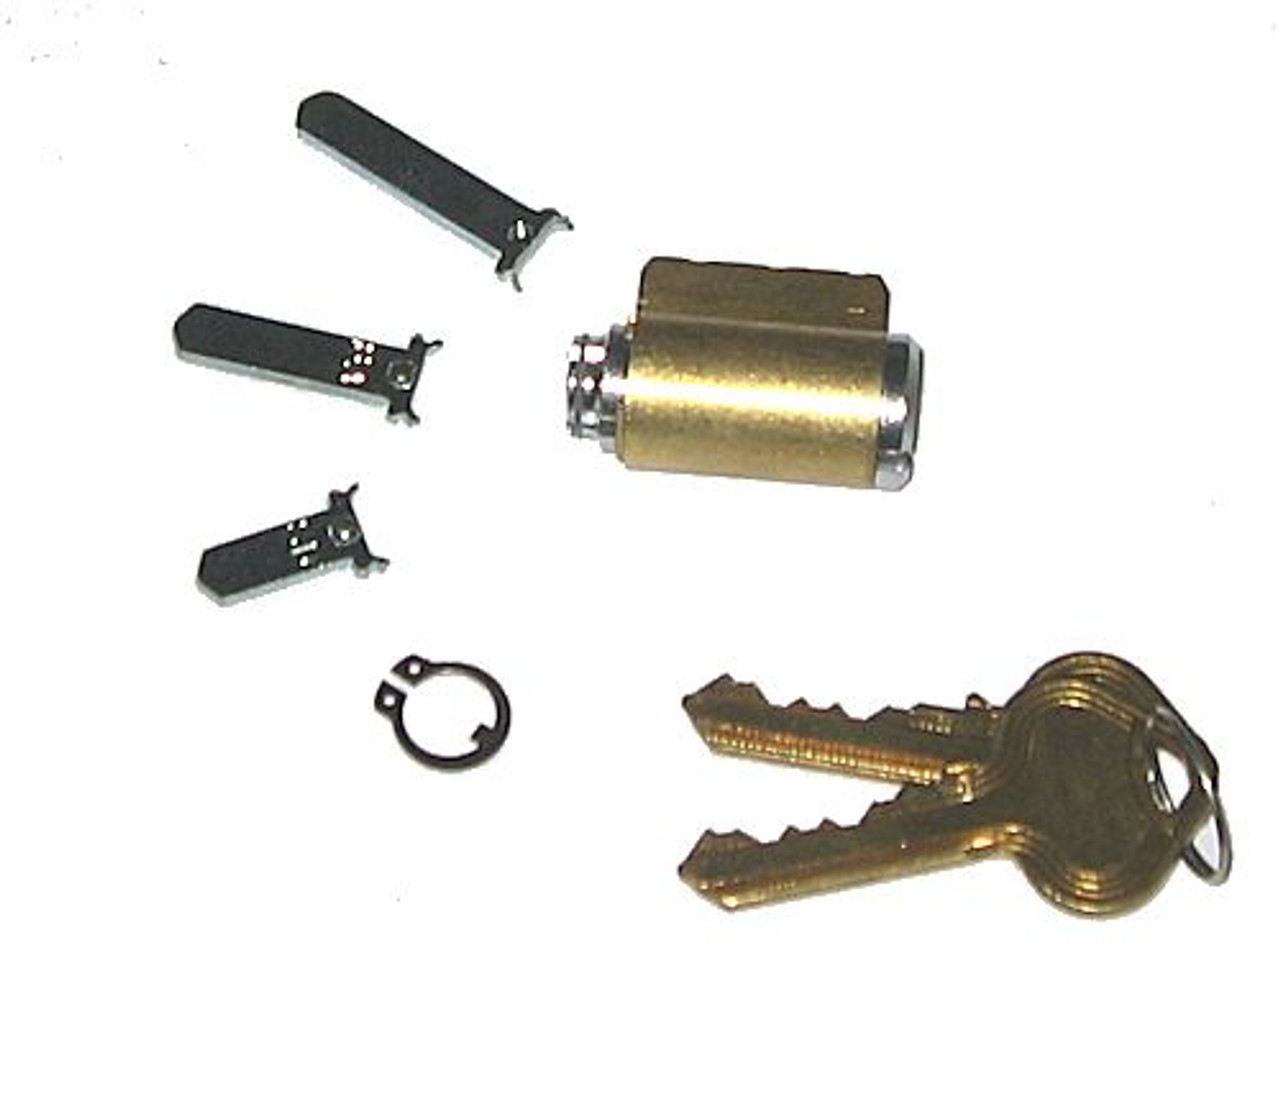 Wholesale Durable Single Connected Schlage Key Deadbolt KIK Lock Cylinder  From m.